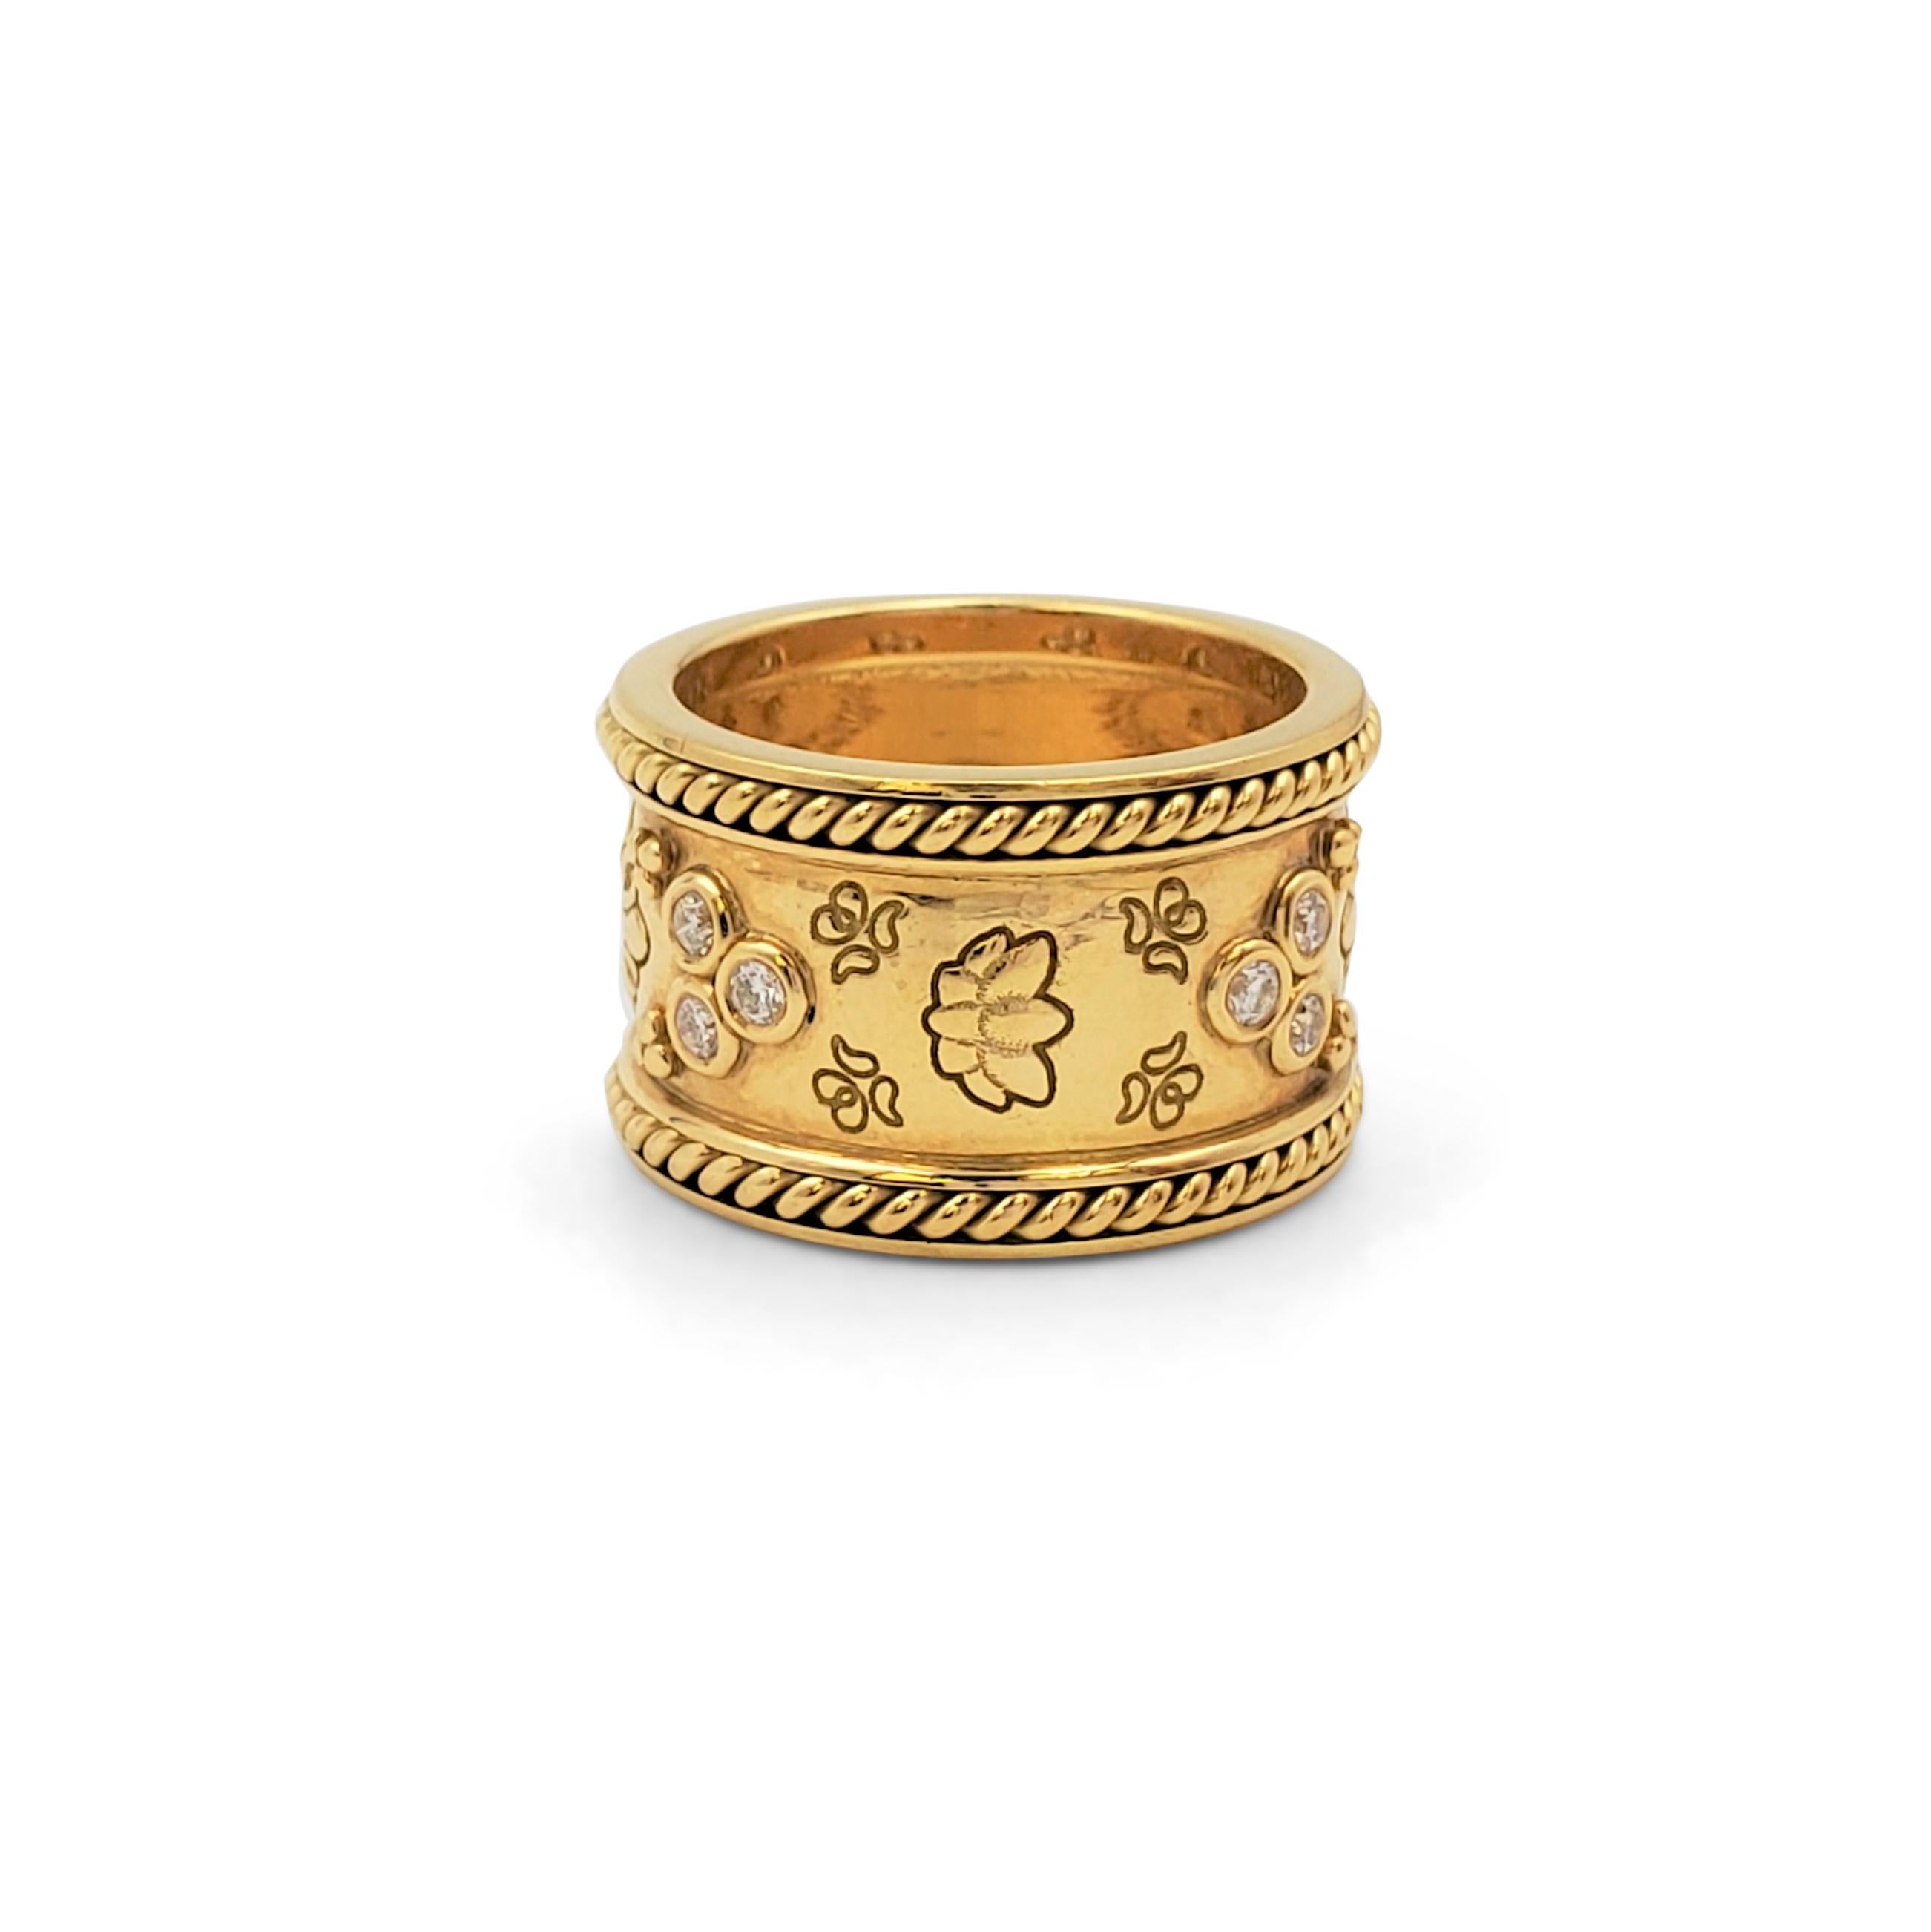 Authentic Temple St. Clair 'Nomad' band ring crafted in 18 karat yellow gold comprised of trio's of bezel-set round brilliant cut diamonds, etched floral patterns, and trios of tiny gold beads. The ring is framed on either edge with a gold rope